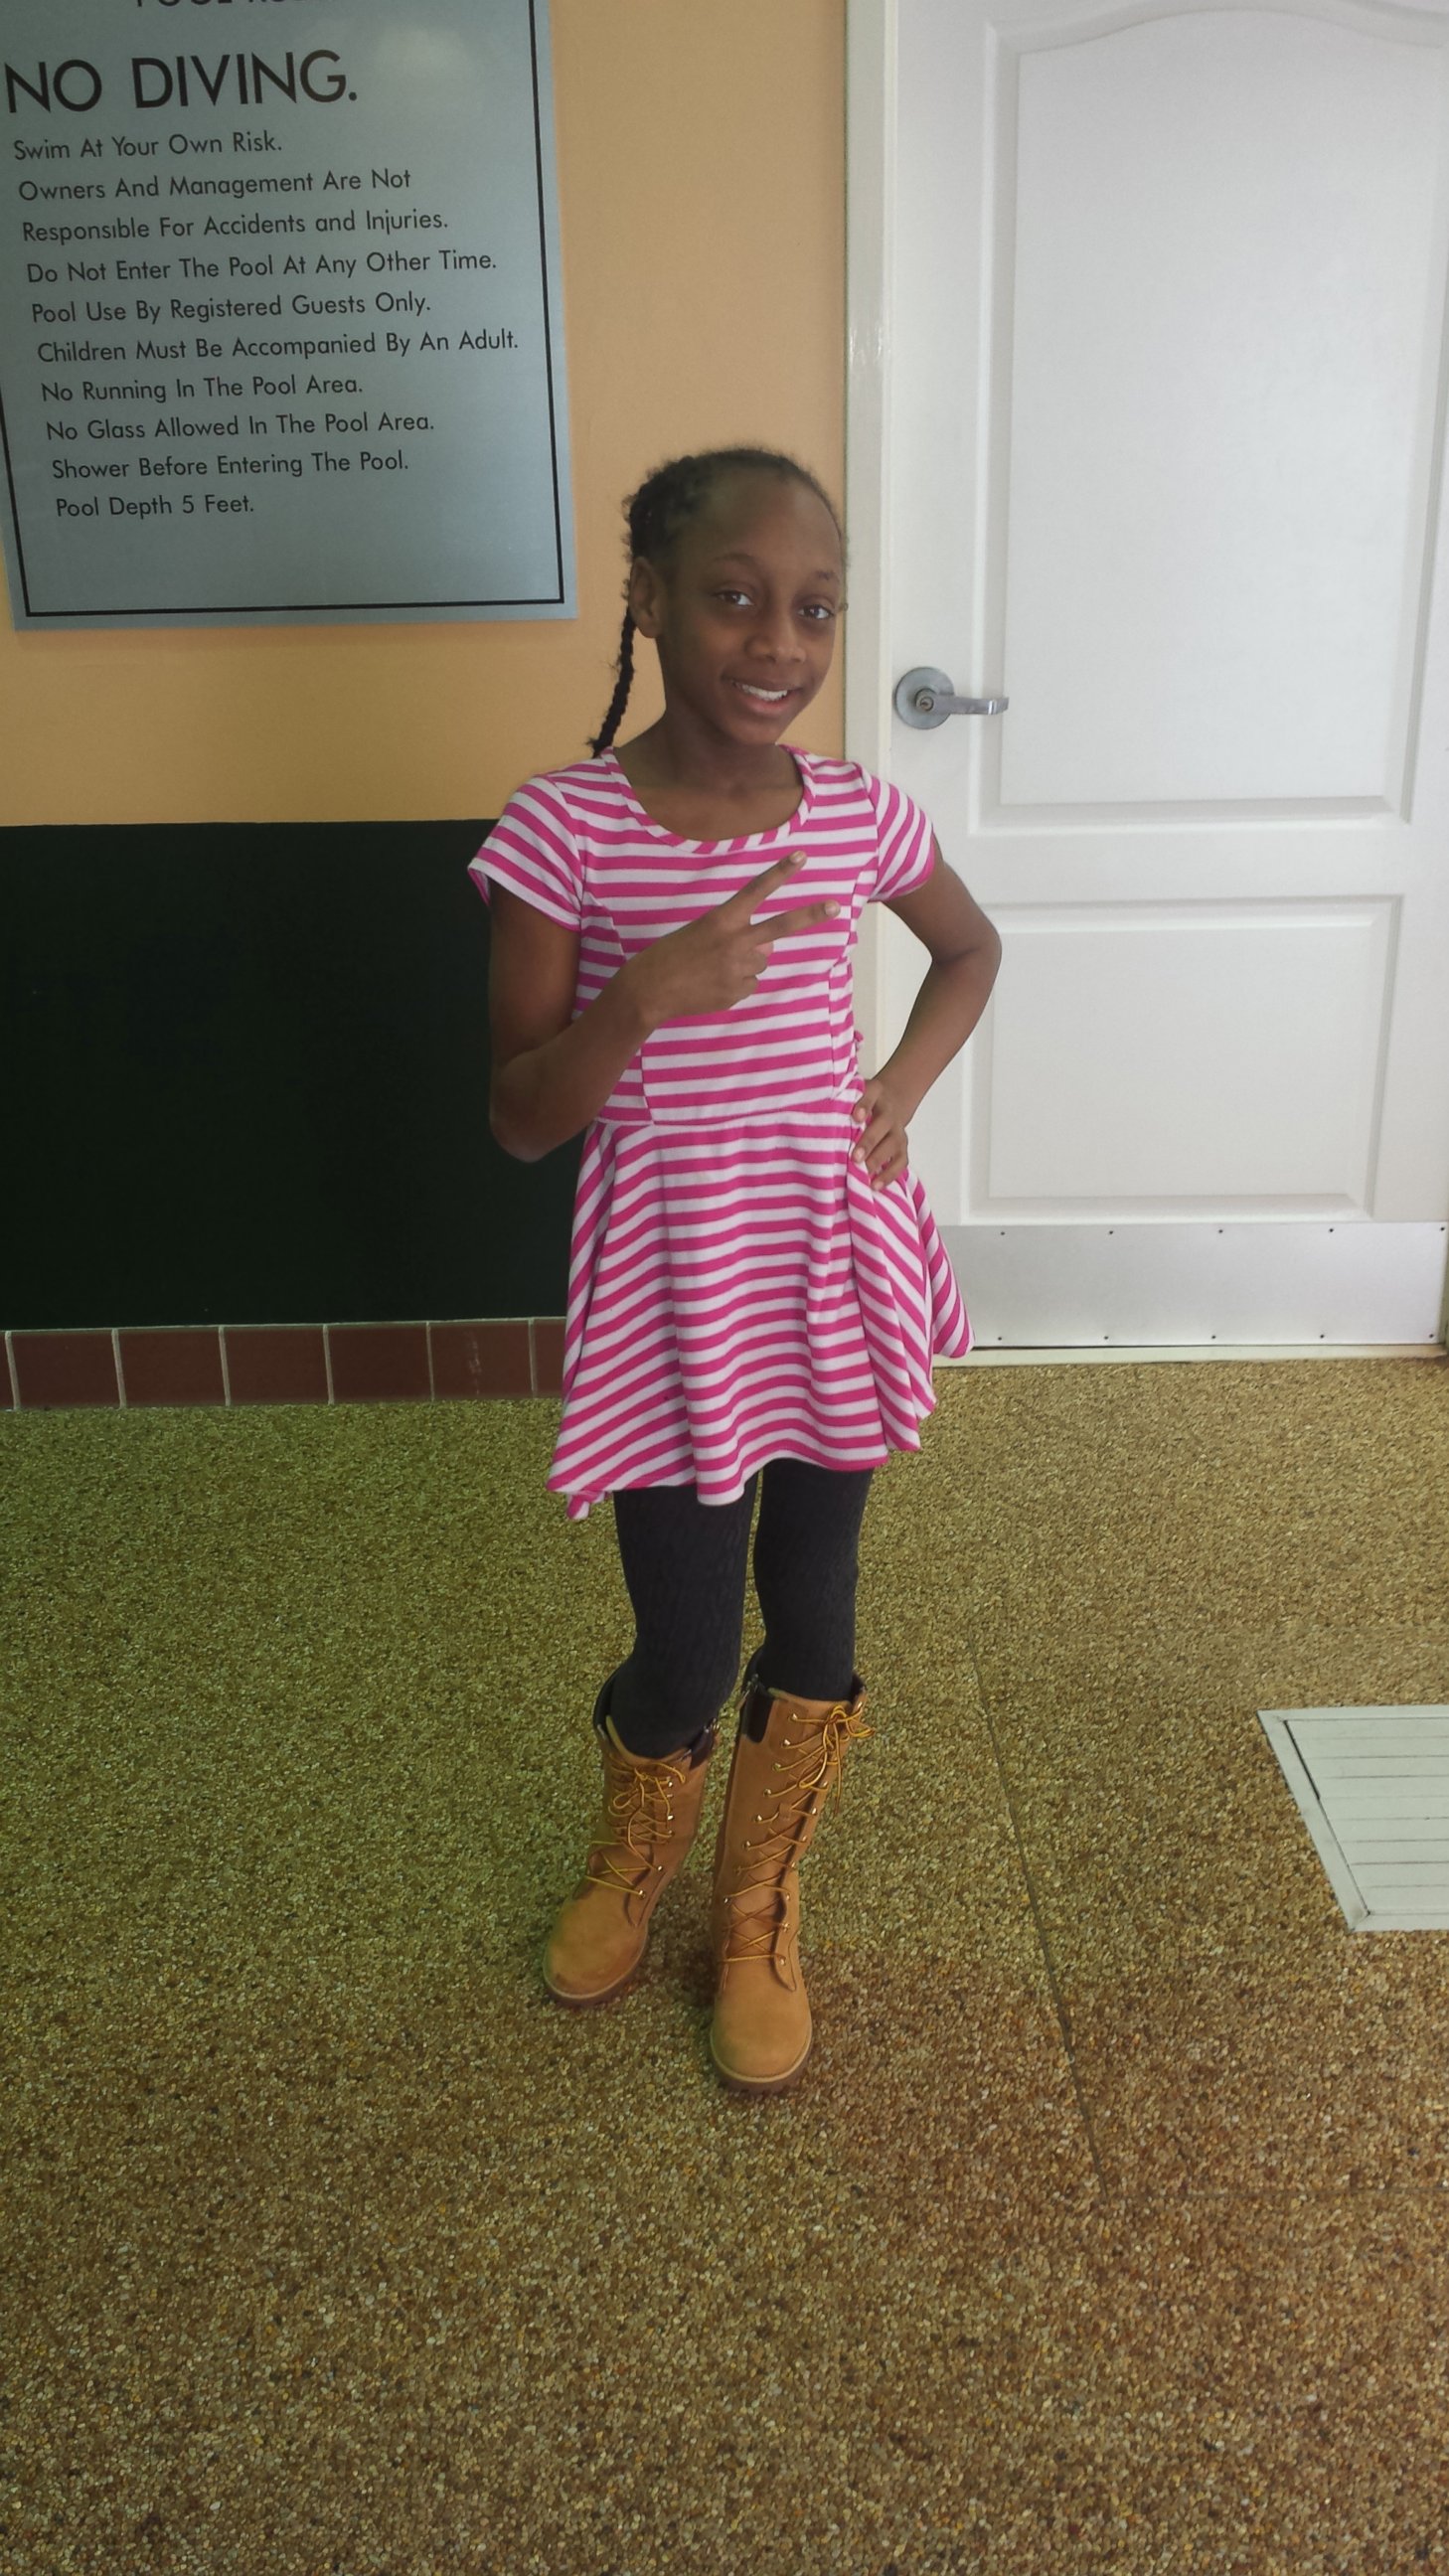 PHOTO: TaJah Monae Matthews' mother says her daughter sustained chemical burns from an over-chlorinated swimming pool.